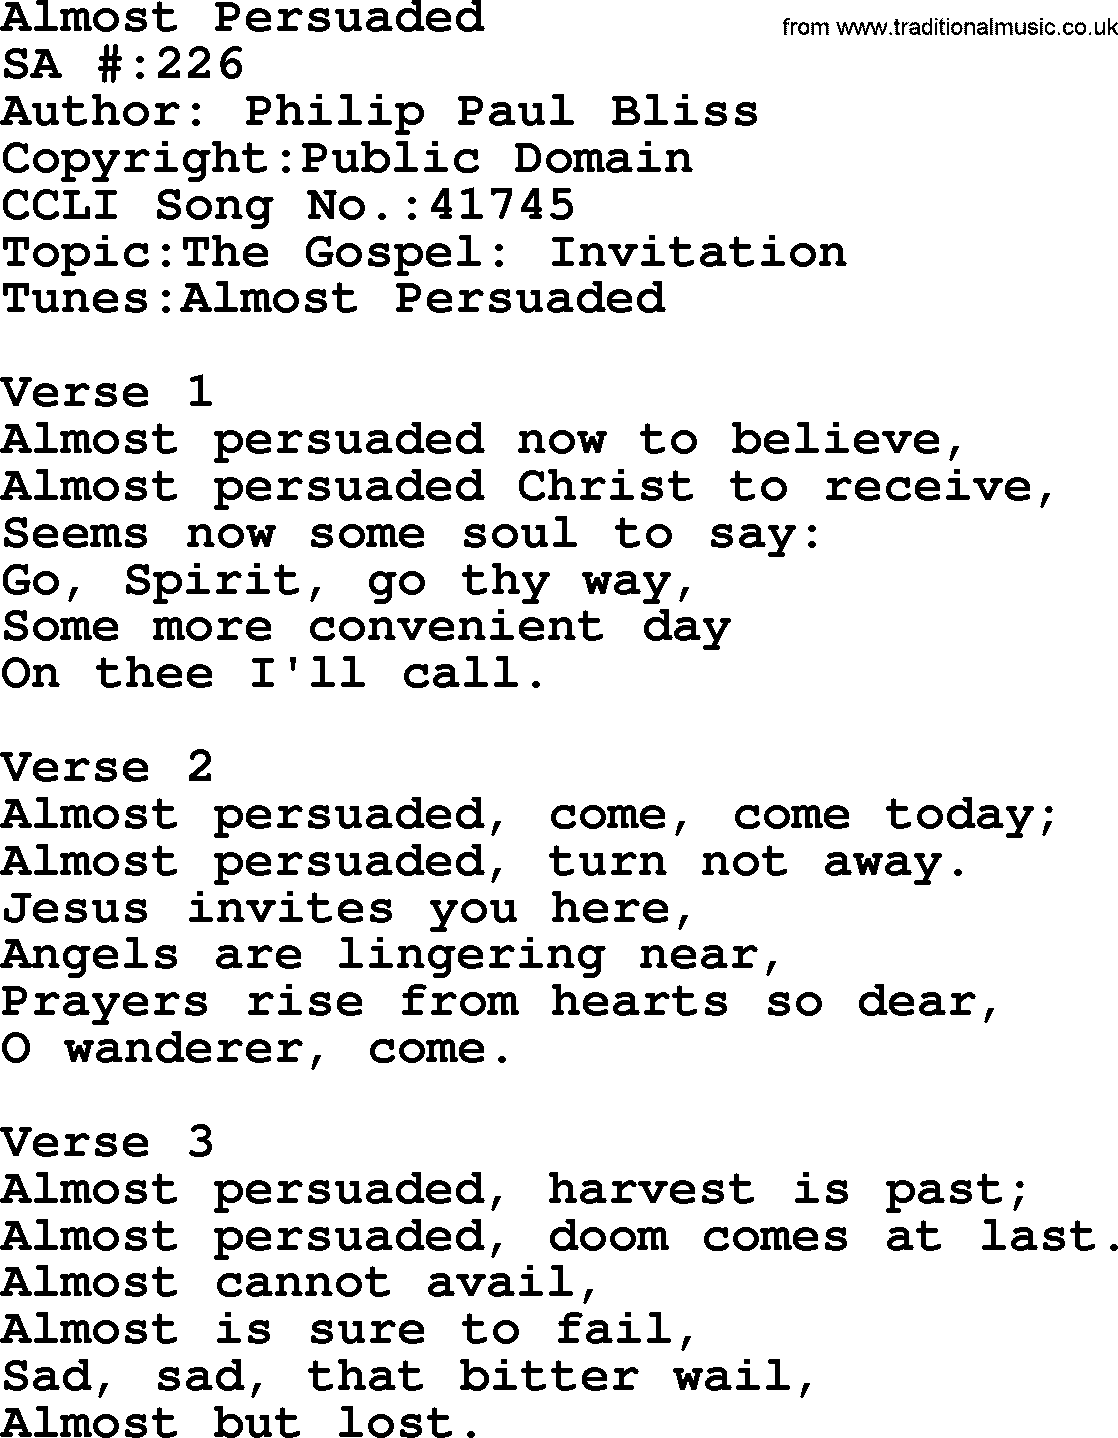 Salvation Army Hymnal, title: Almost Persuaded, with lyrics and PDF,